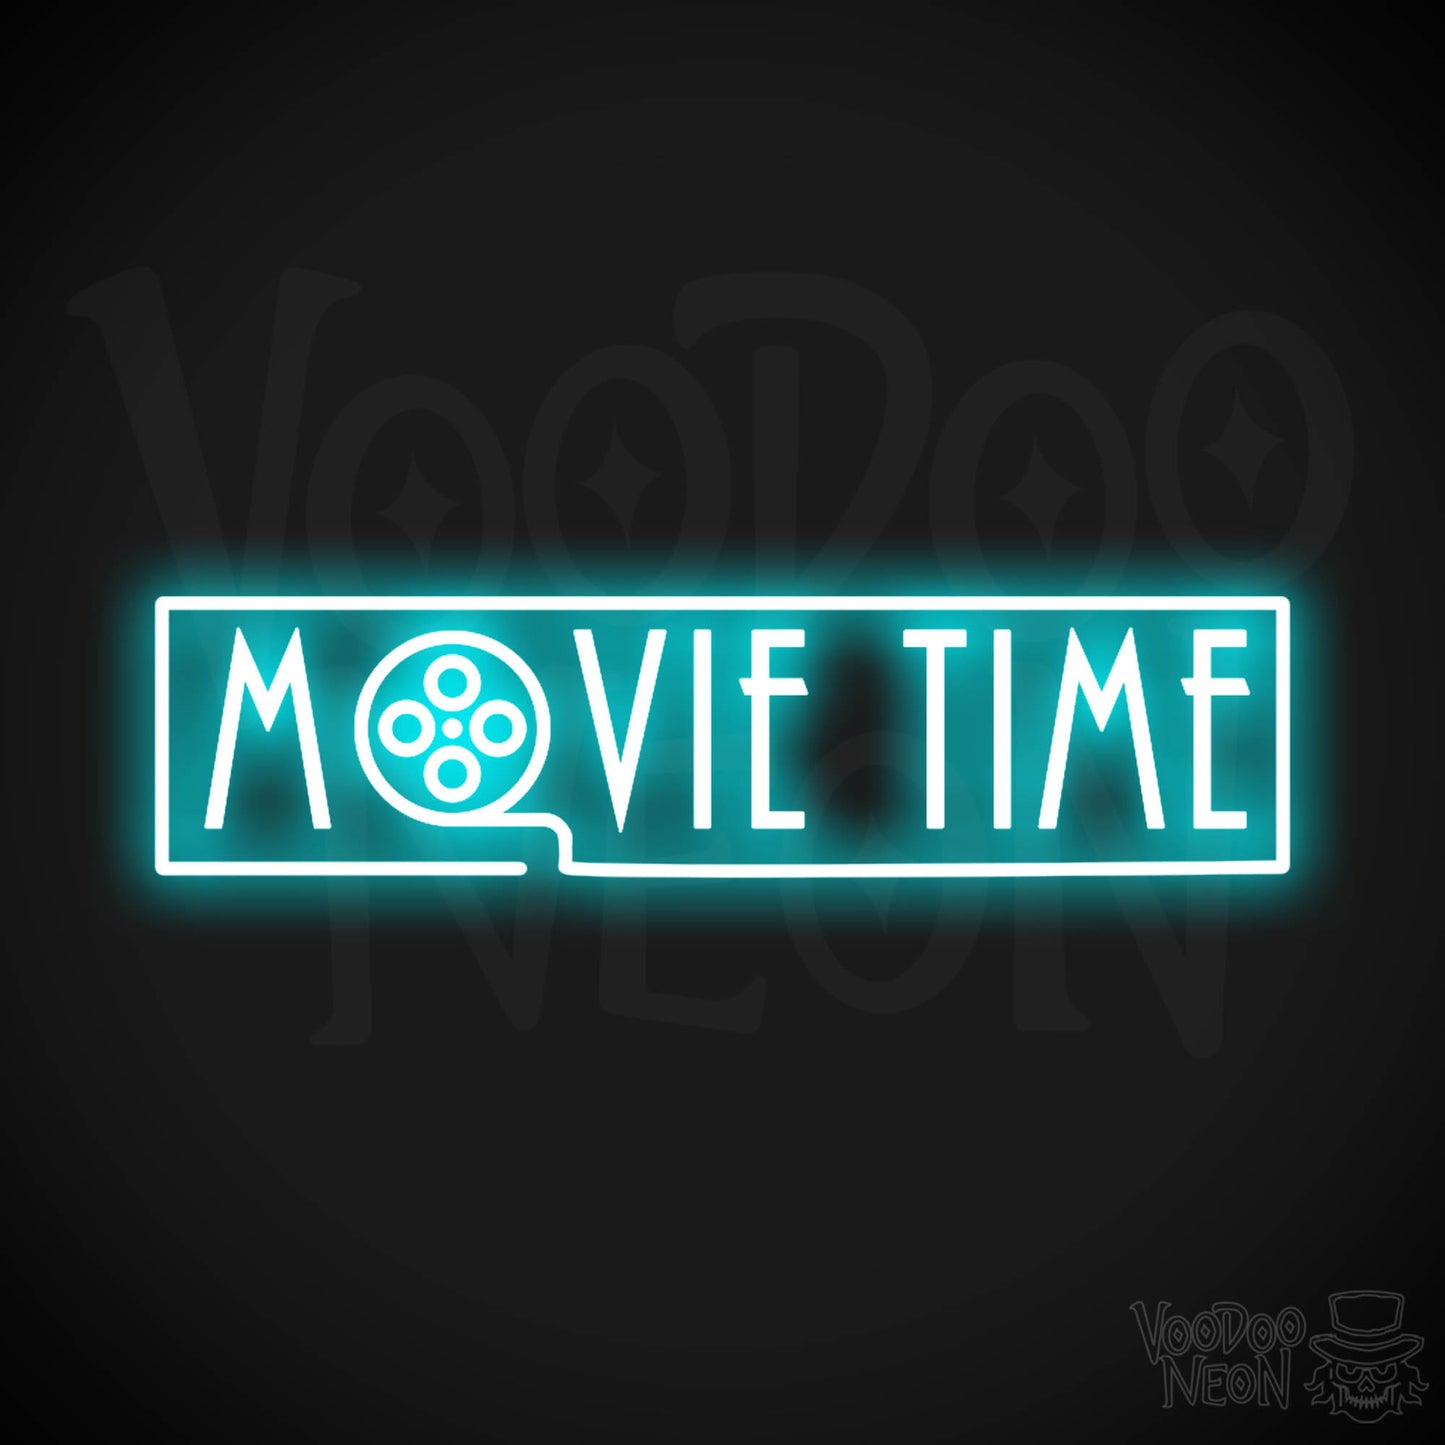 Movie Time Neon Sign - Neon Movie Time Sign - Color Ice Blue